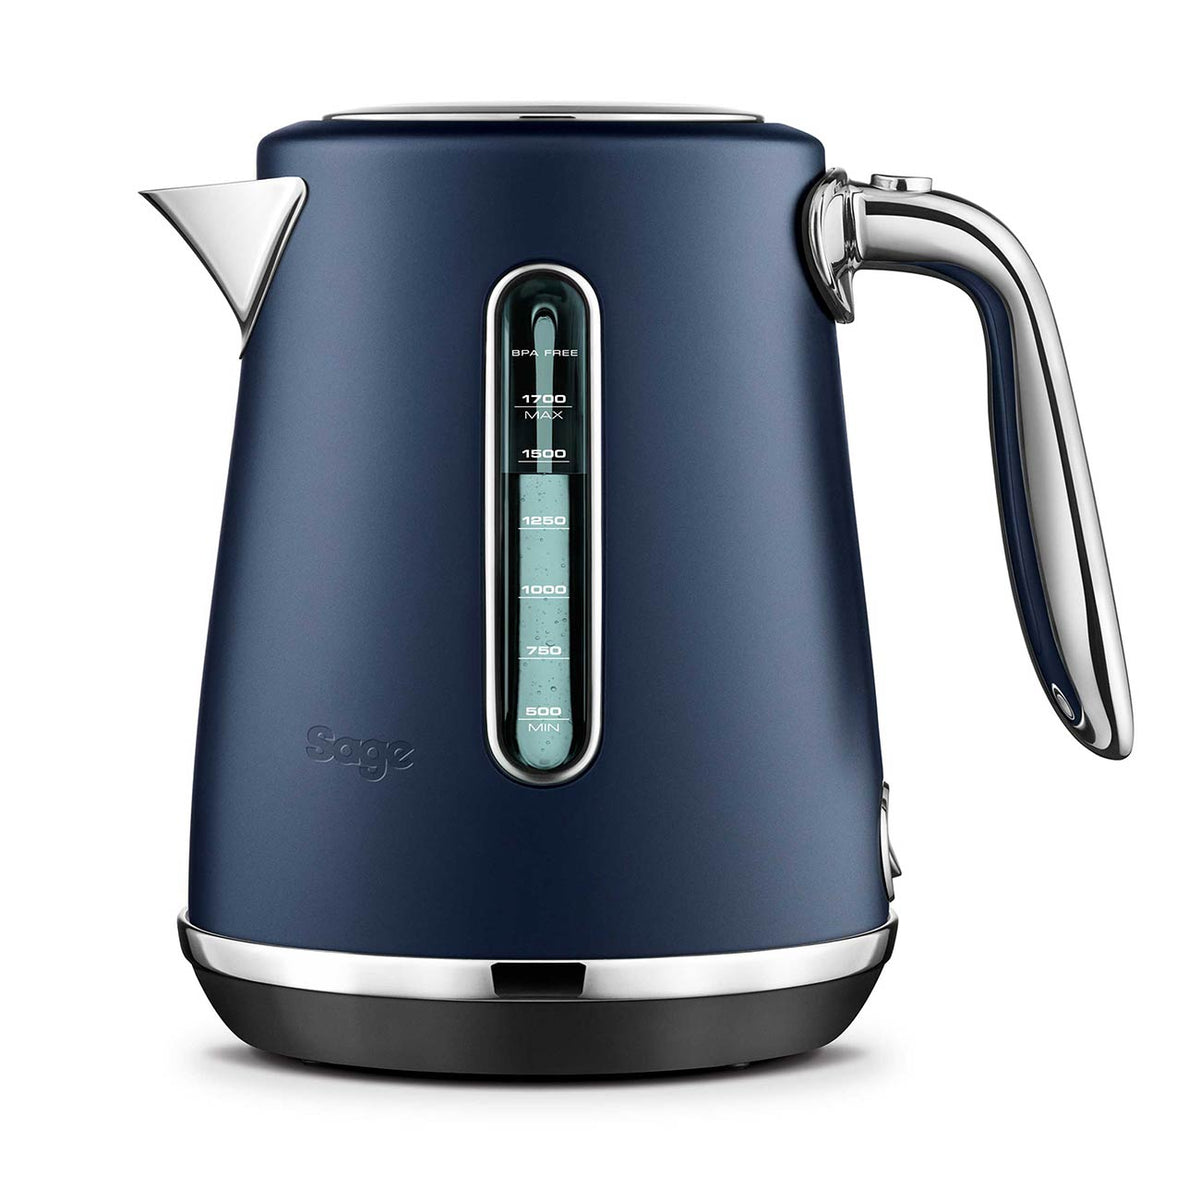 Sage The Soft Top Luxe 1.7L 2400W Kettle - Damson Blue | SKE735DBL4GEU1 from Sage - DID Electrical